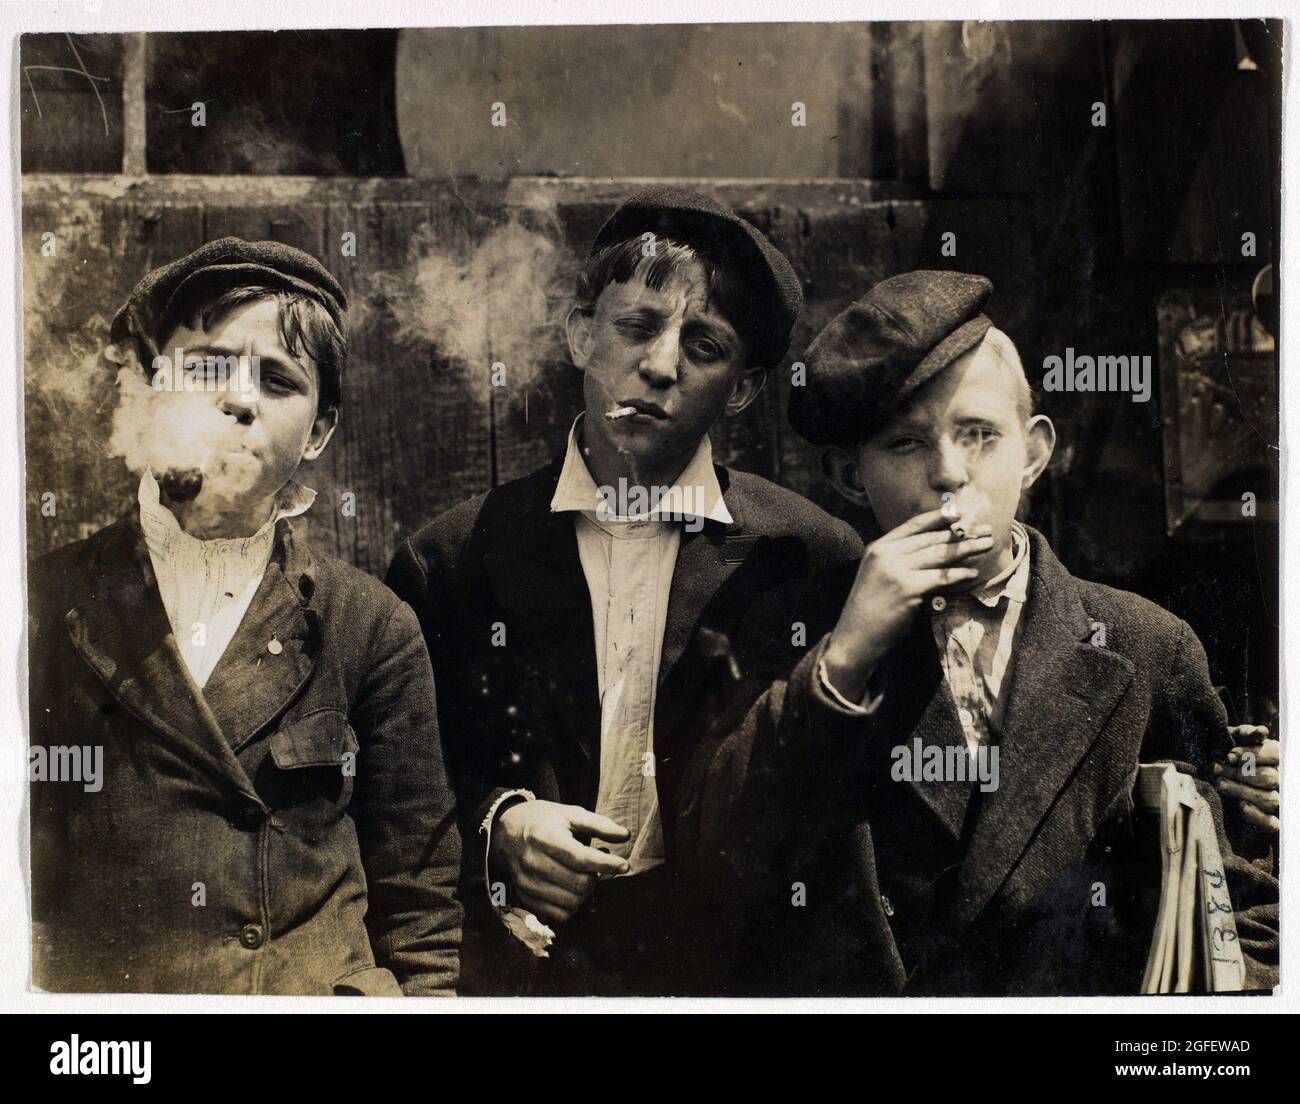 11.00 A.M. Monday, May 9th, 1910. Newsies at Skeeter's Branch, Jefferson near Franklin. They were all smoking. Location: St. Louis, Missouri. Stock Photo